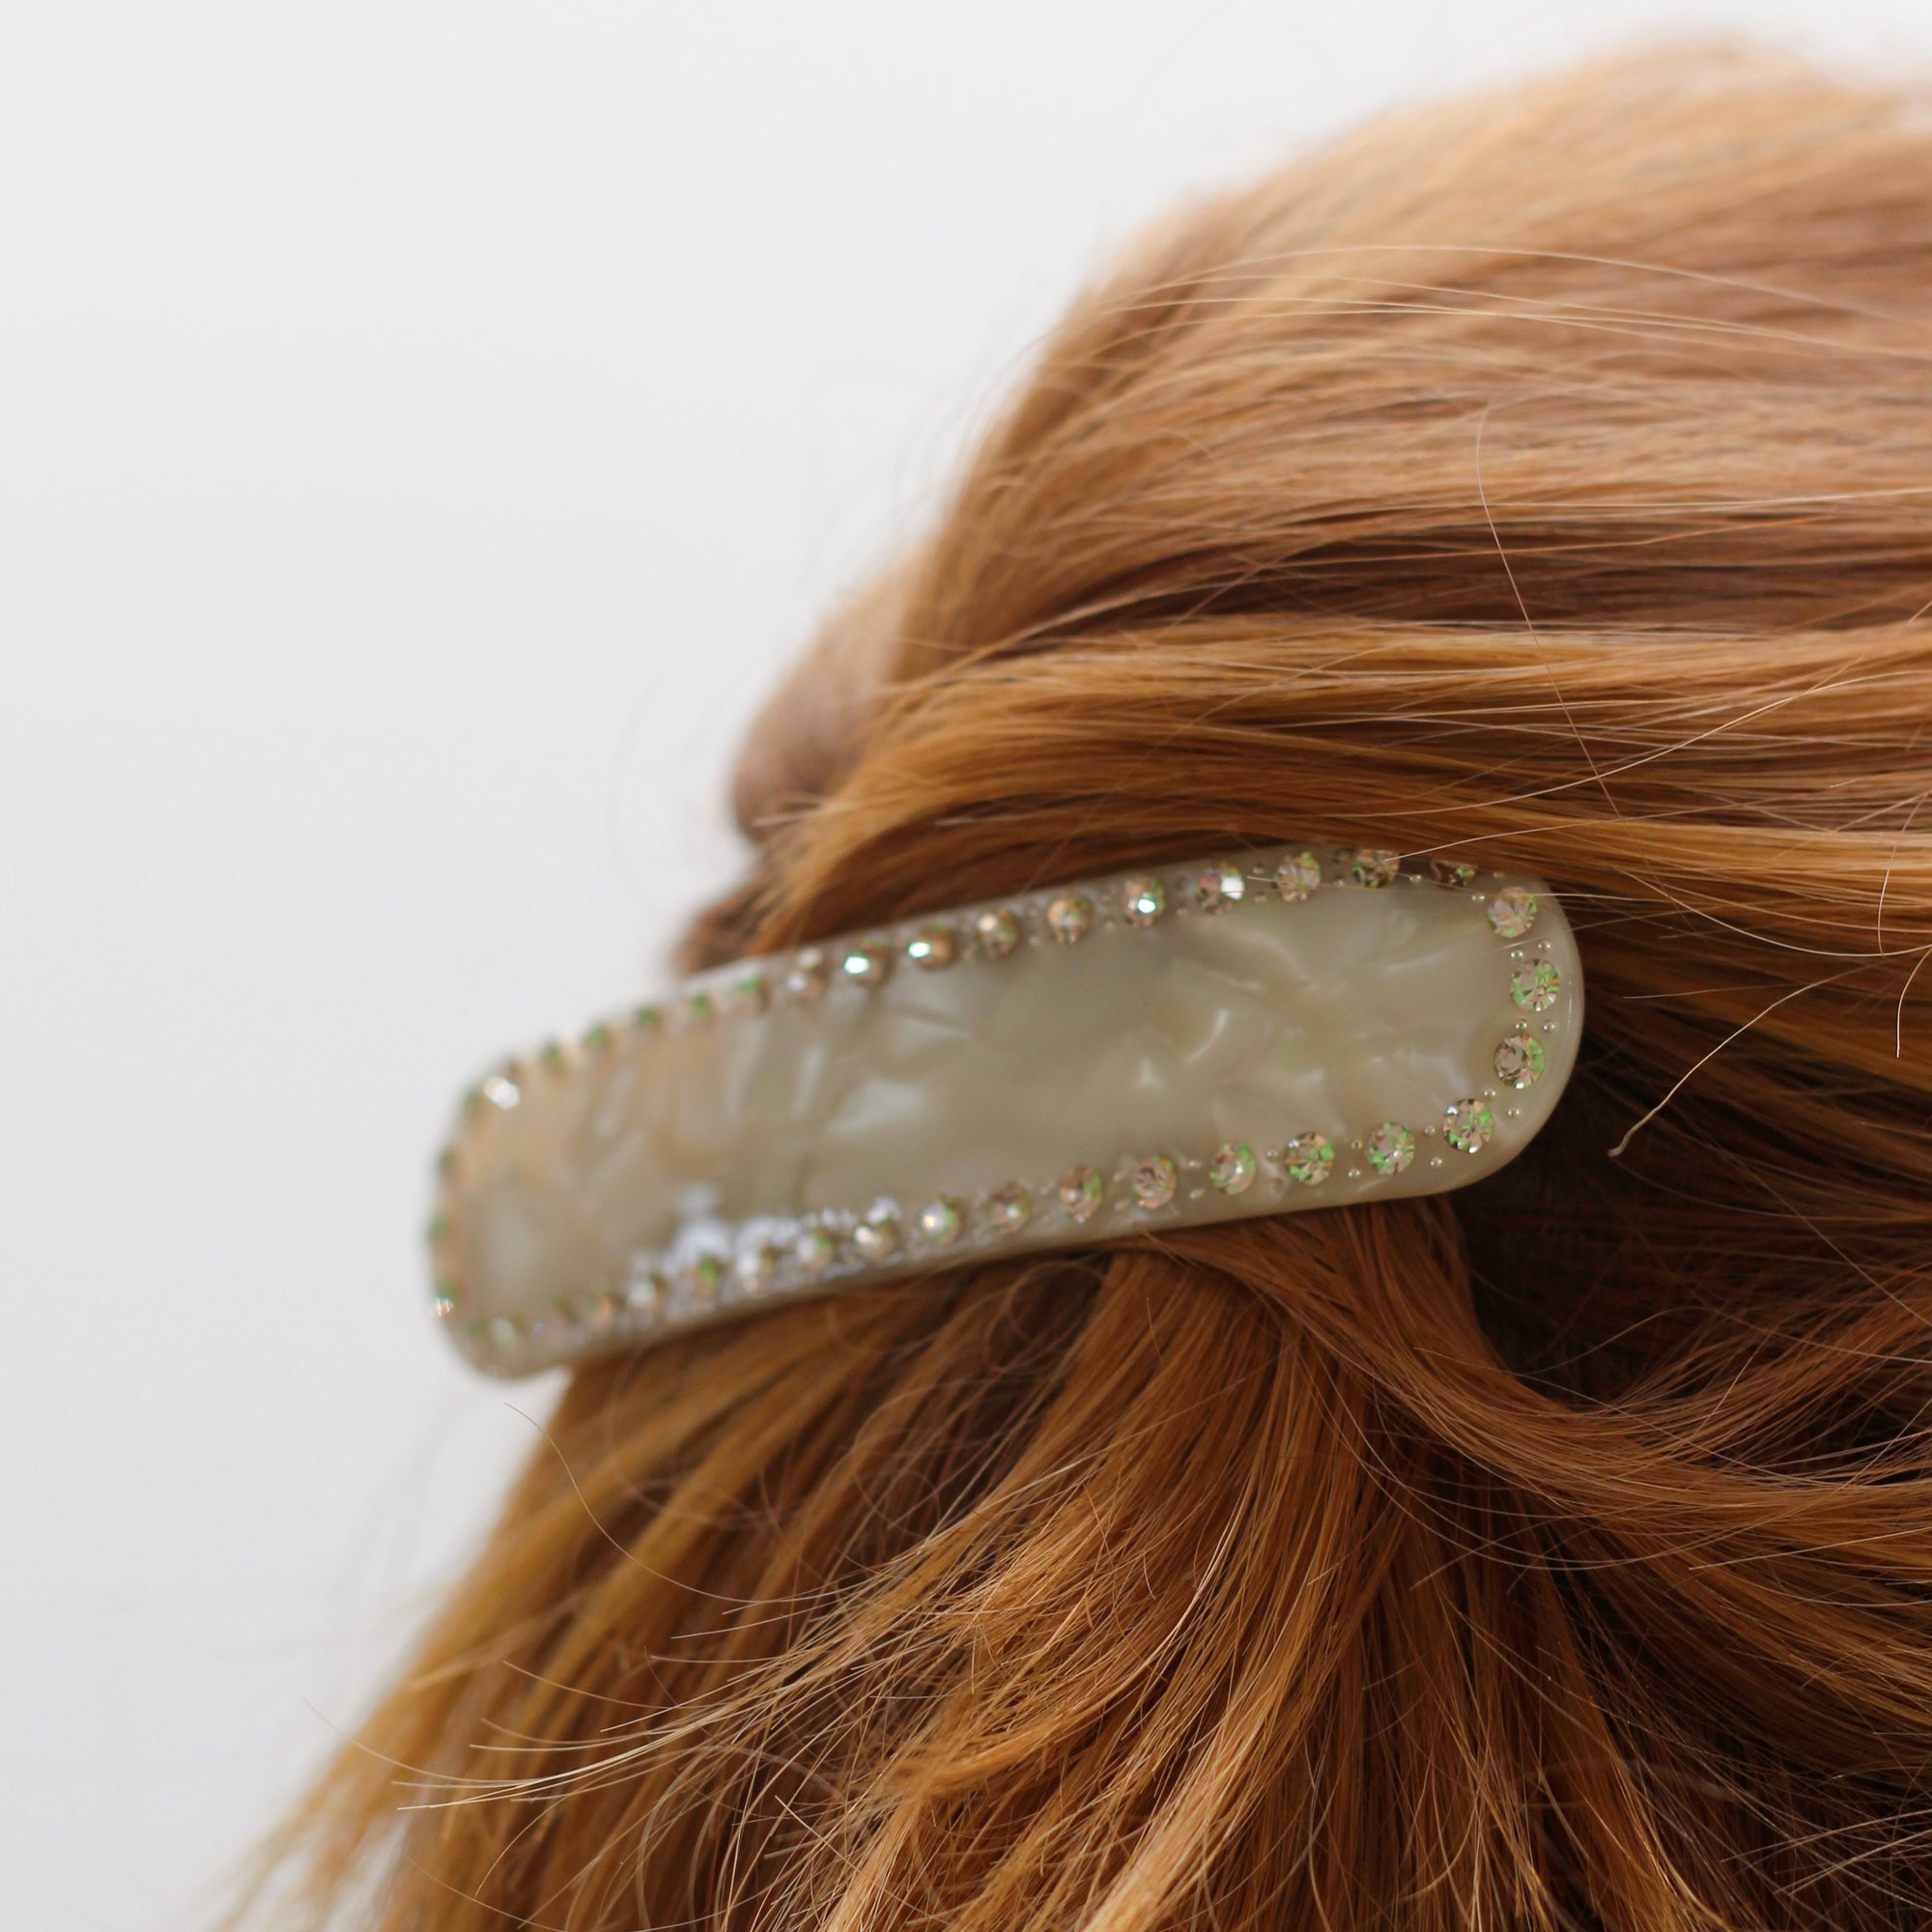 Meet ZADI XL!  A round edged rectangular hair clips with with jewelled detailing and French barrette clasp. Clips to the hair securely and holds well. We recommend using it as a feature clip at the back of the hair above a ponytail or to secure a half up look. Please note this is the larger version of the original ZADI clip in Ivory Jewel.  Each clip comes in a branded Tort pouch (colours change seasonally).  Size: 11.5cm  Colour: ivory pearl with silver crystal accents  Material: eco-resin